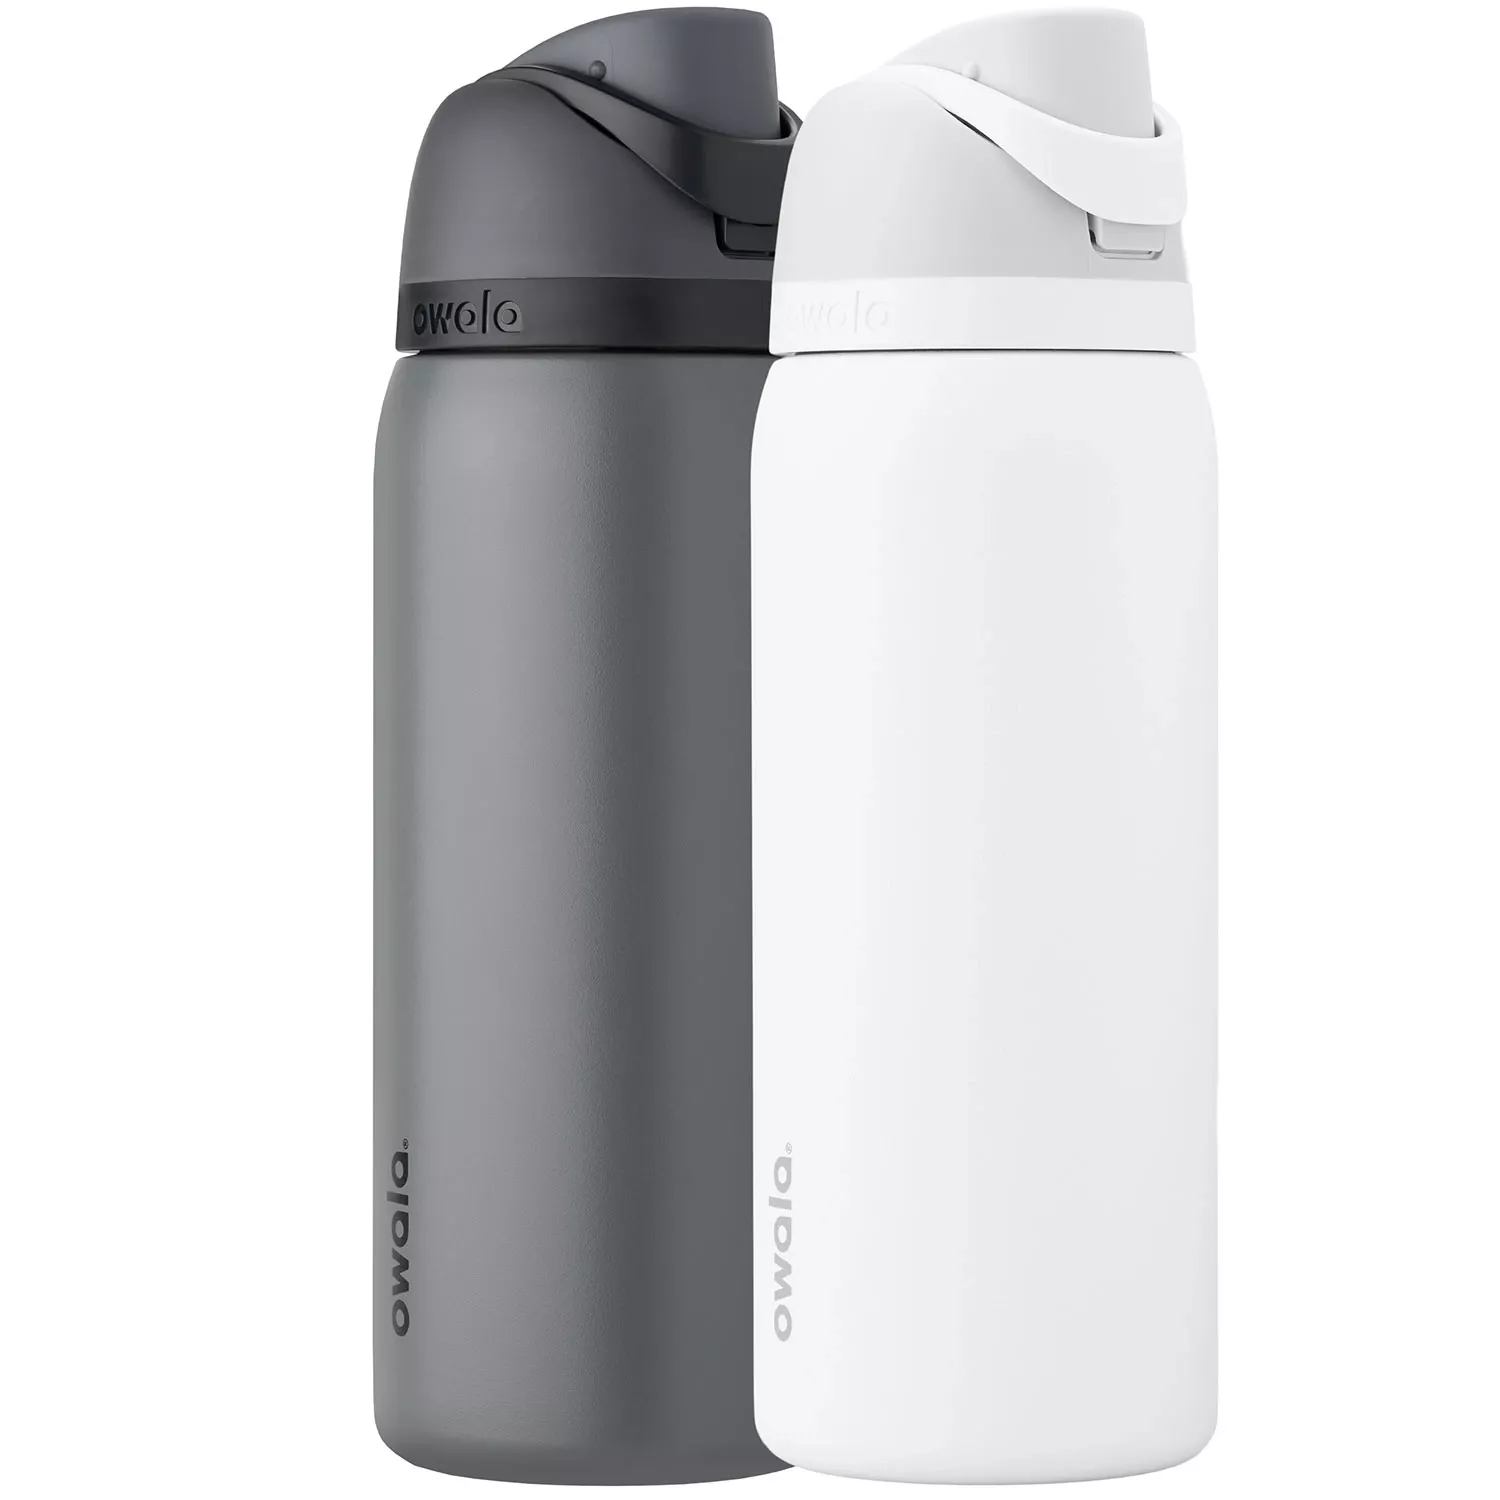 Owala FreeSip Stainless Steel Hydration Bottle 24 oz Assorted